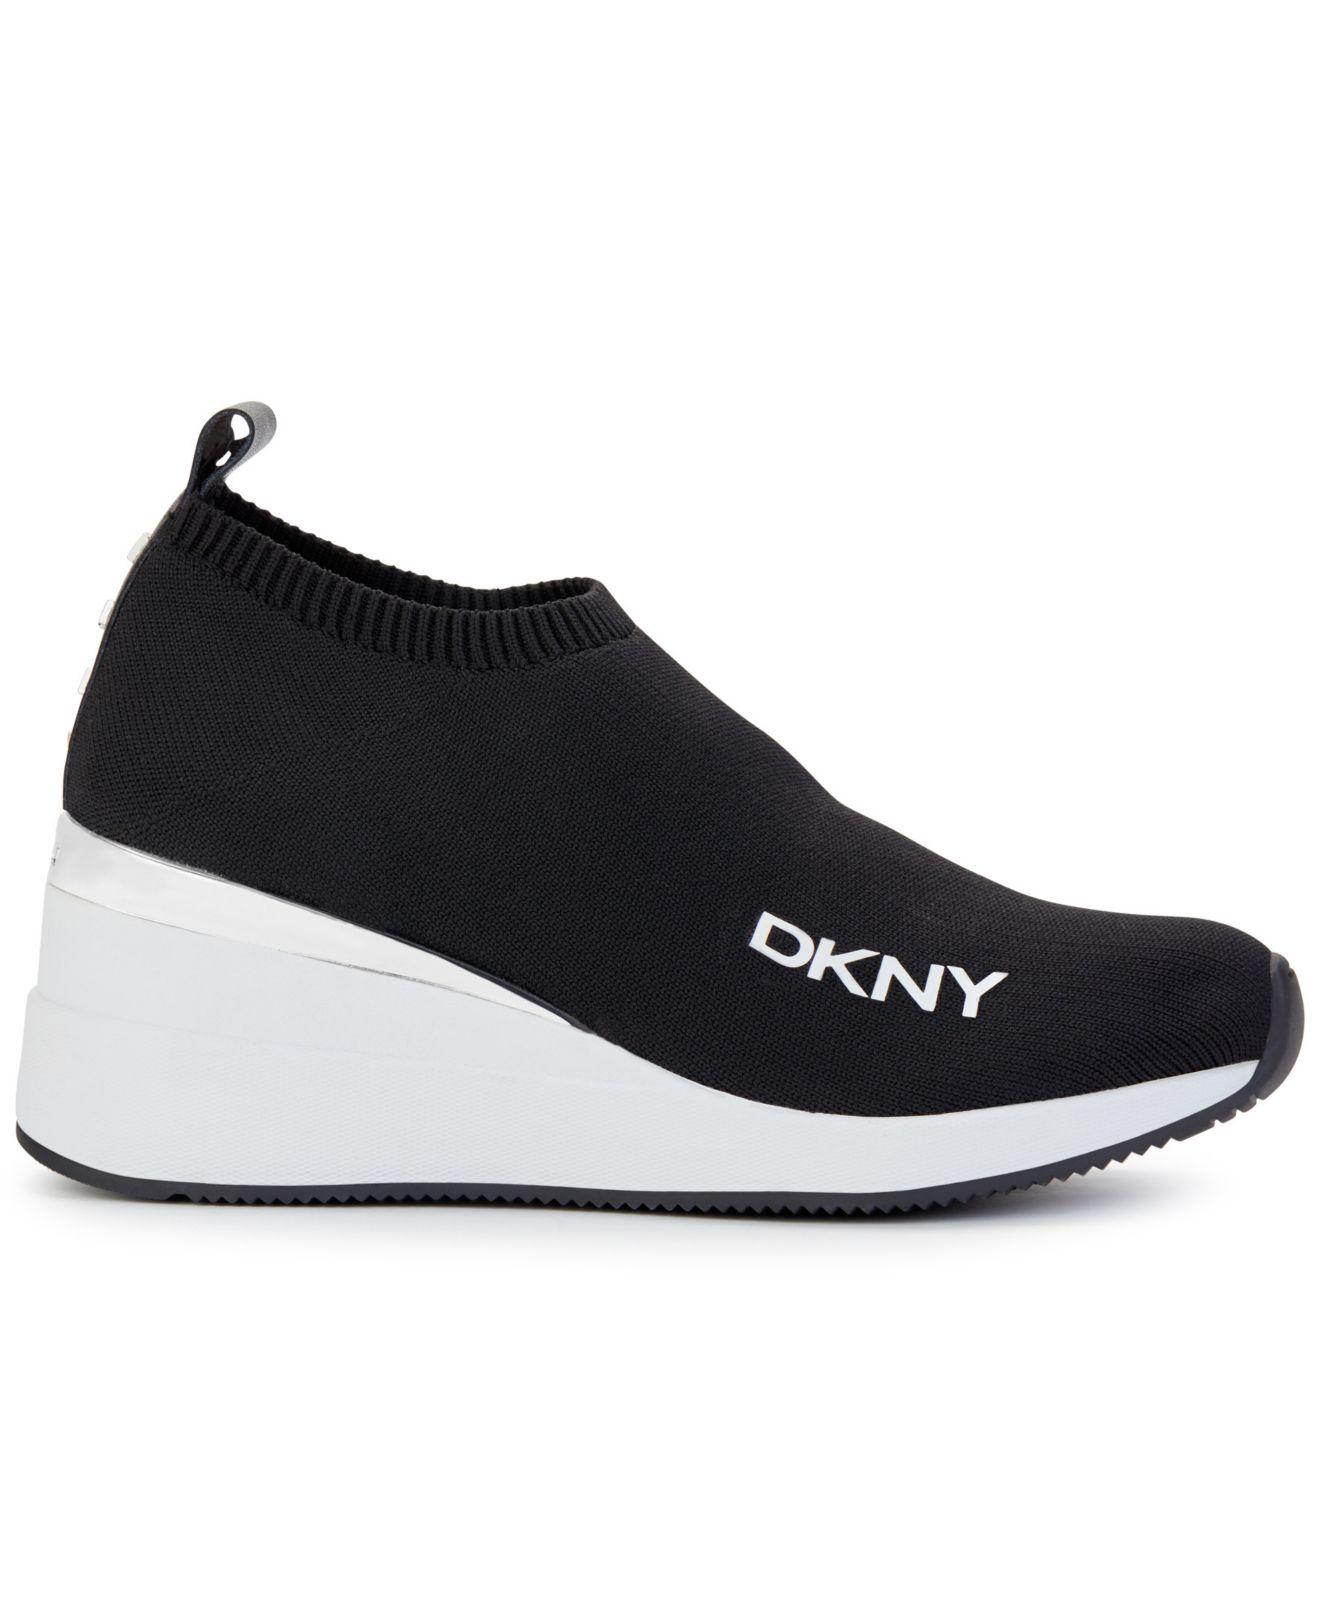 DKNY Leather Parks Slip-on Wedge Sneakers in Black | Lyst